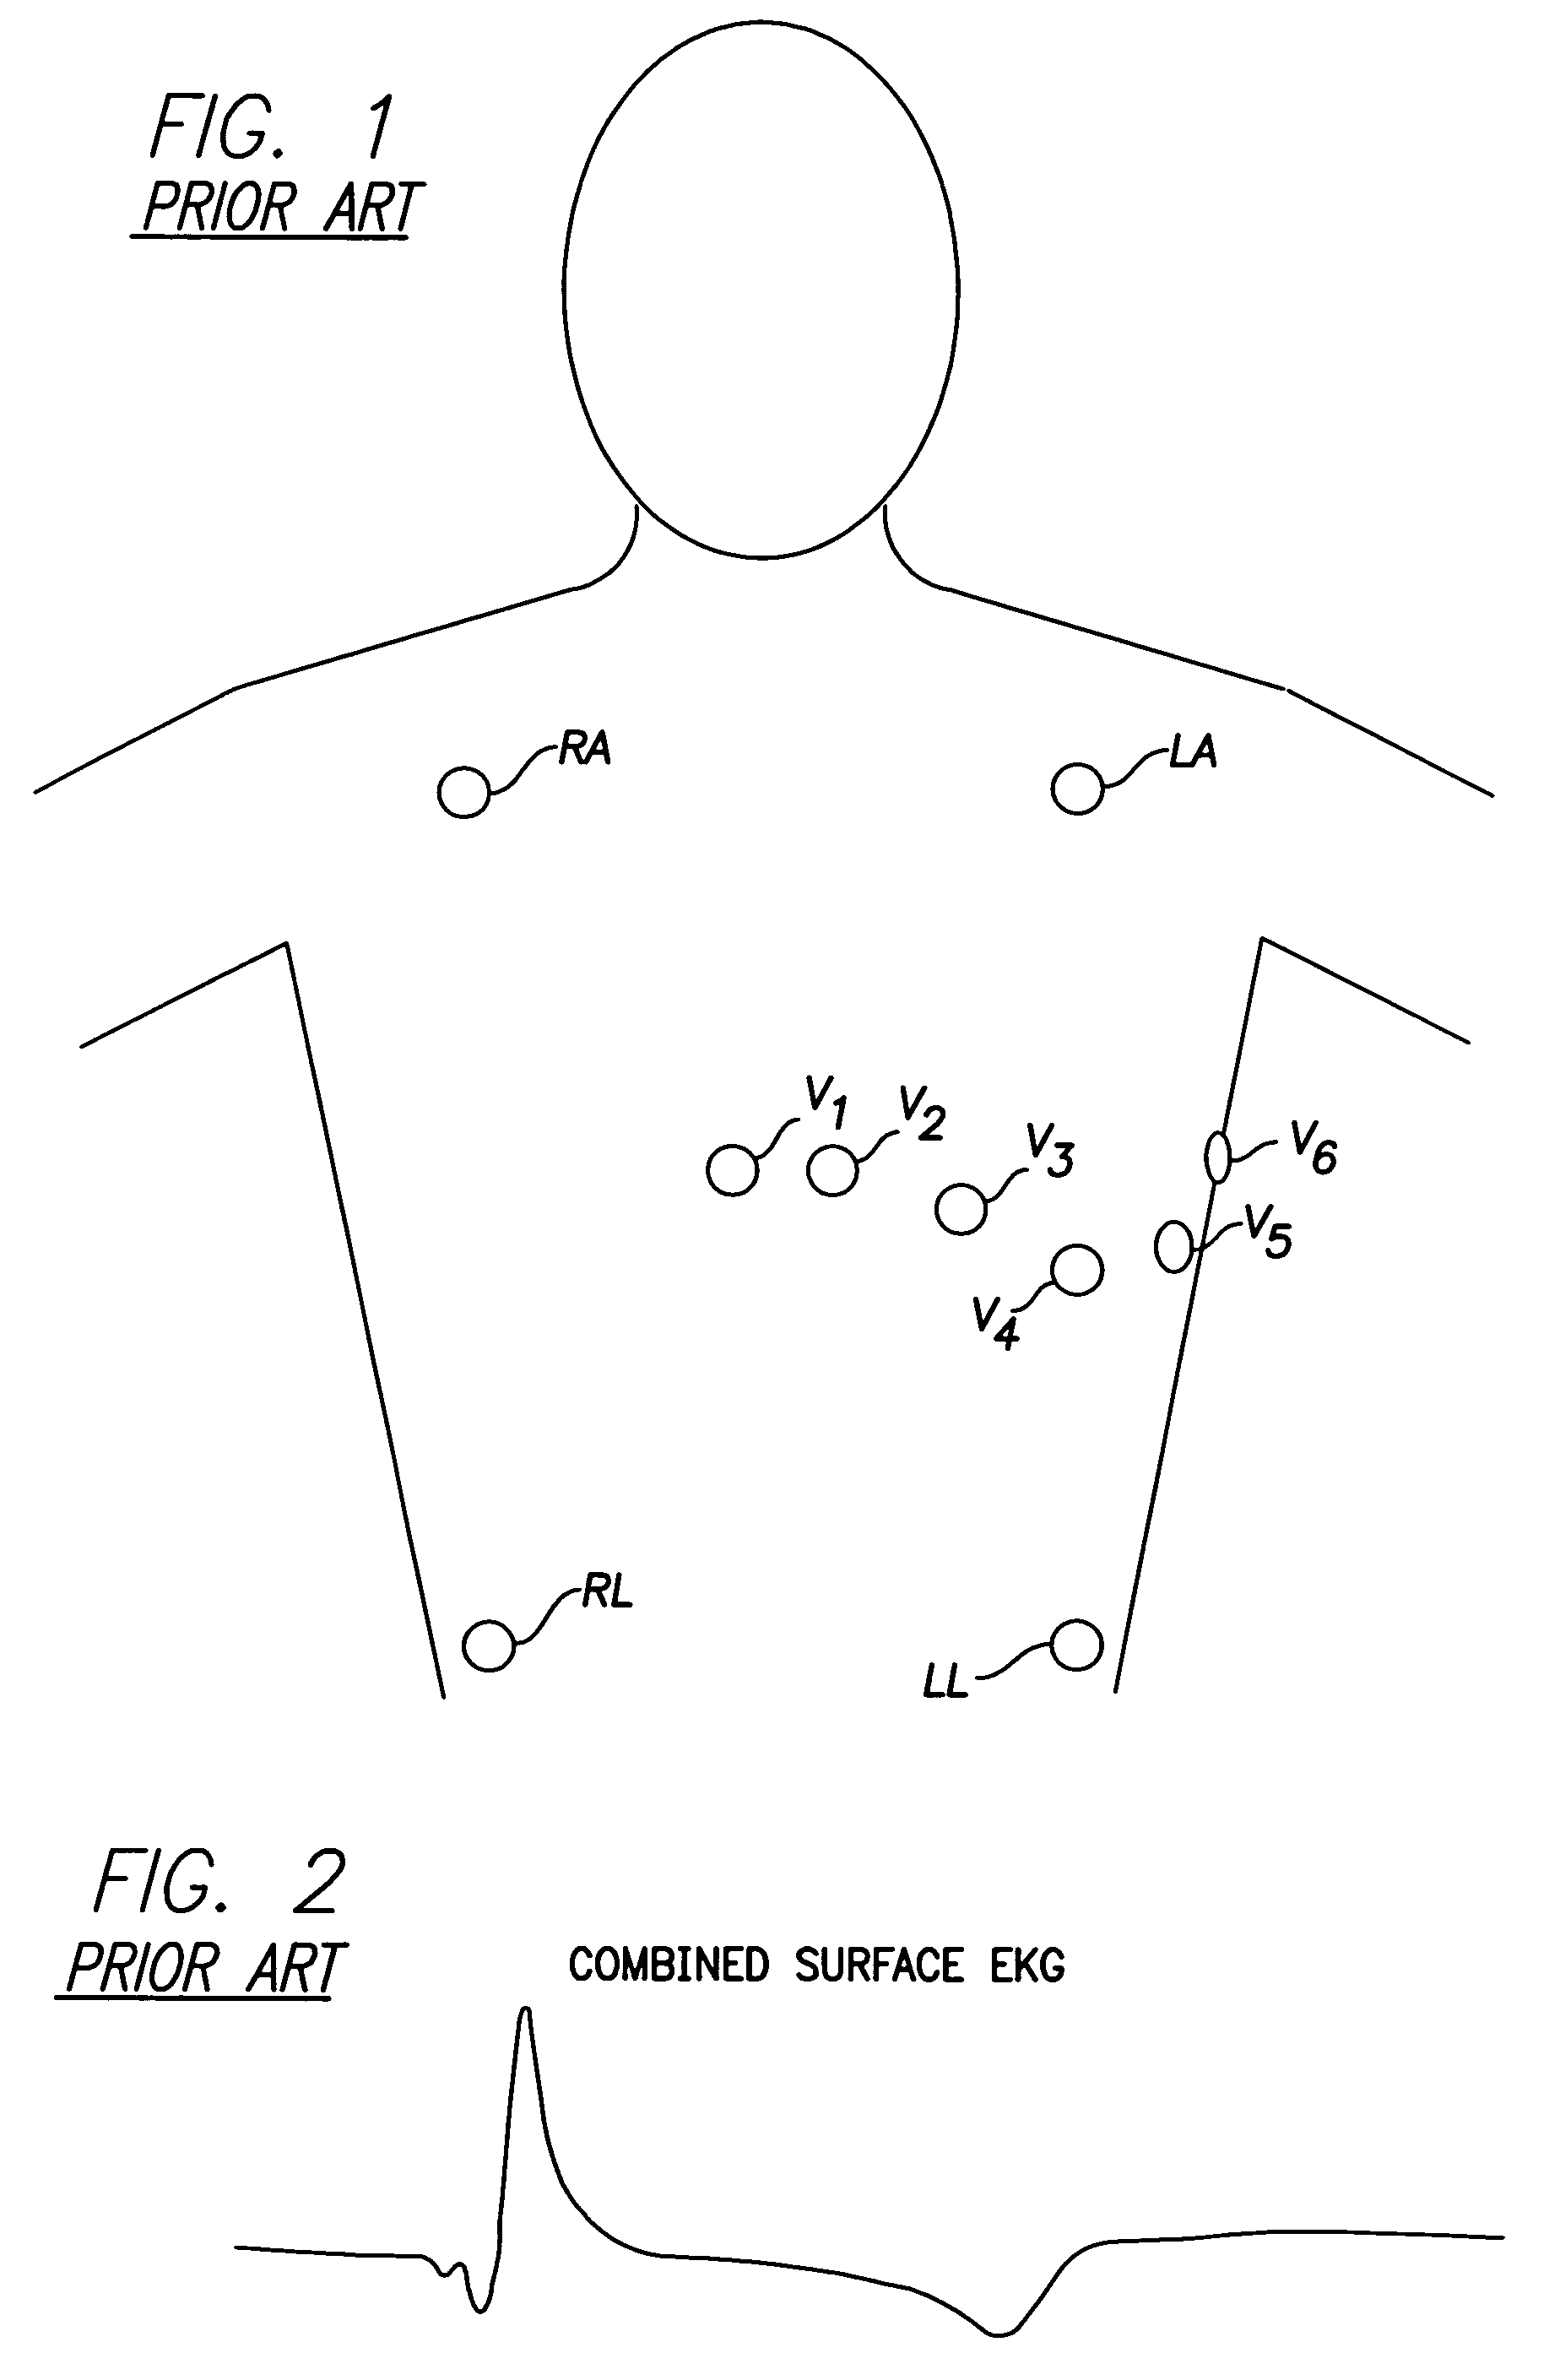 System and method for emulating a surface EKG for use with transtelephonic monitoring of an implantable medical device